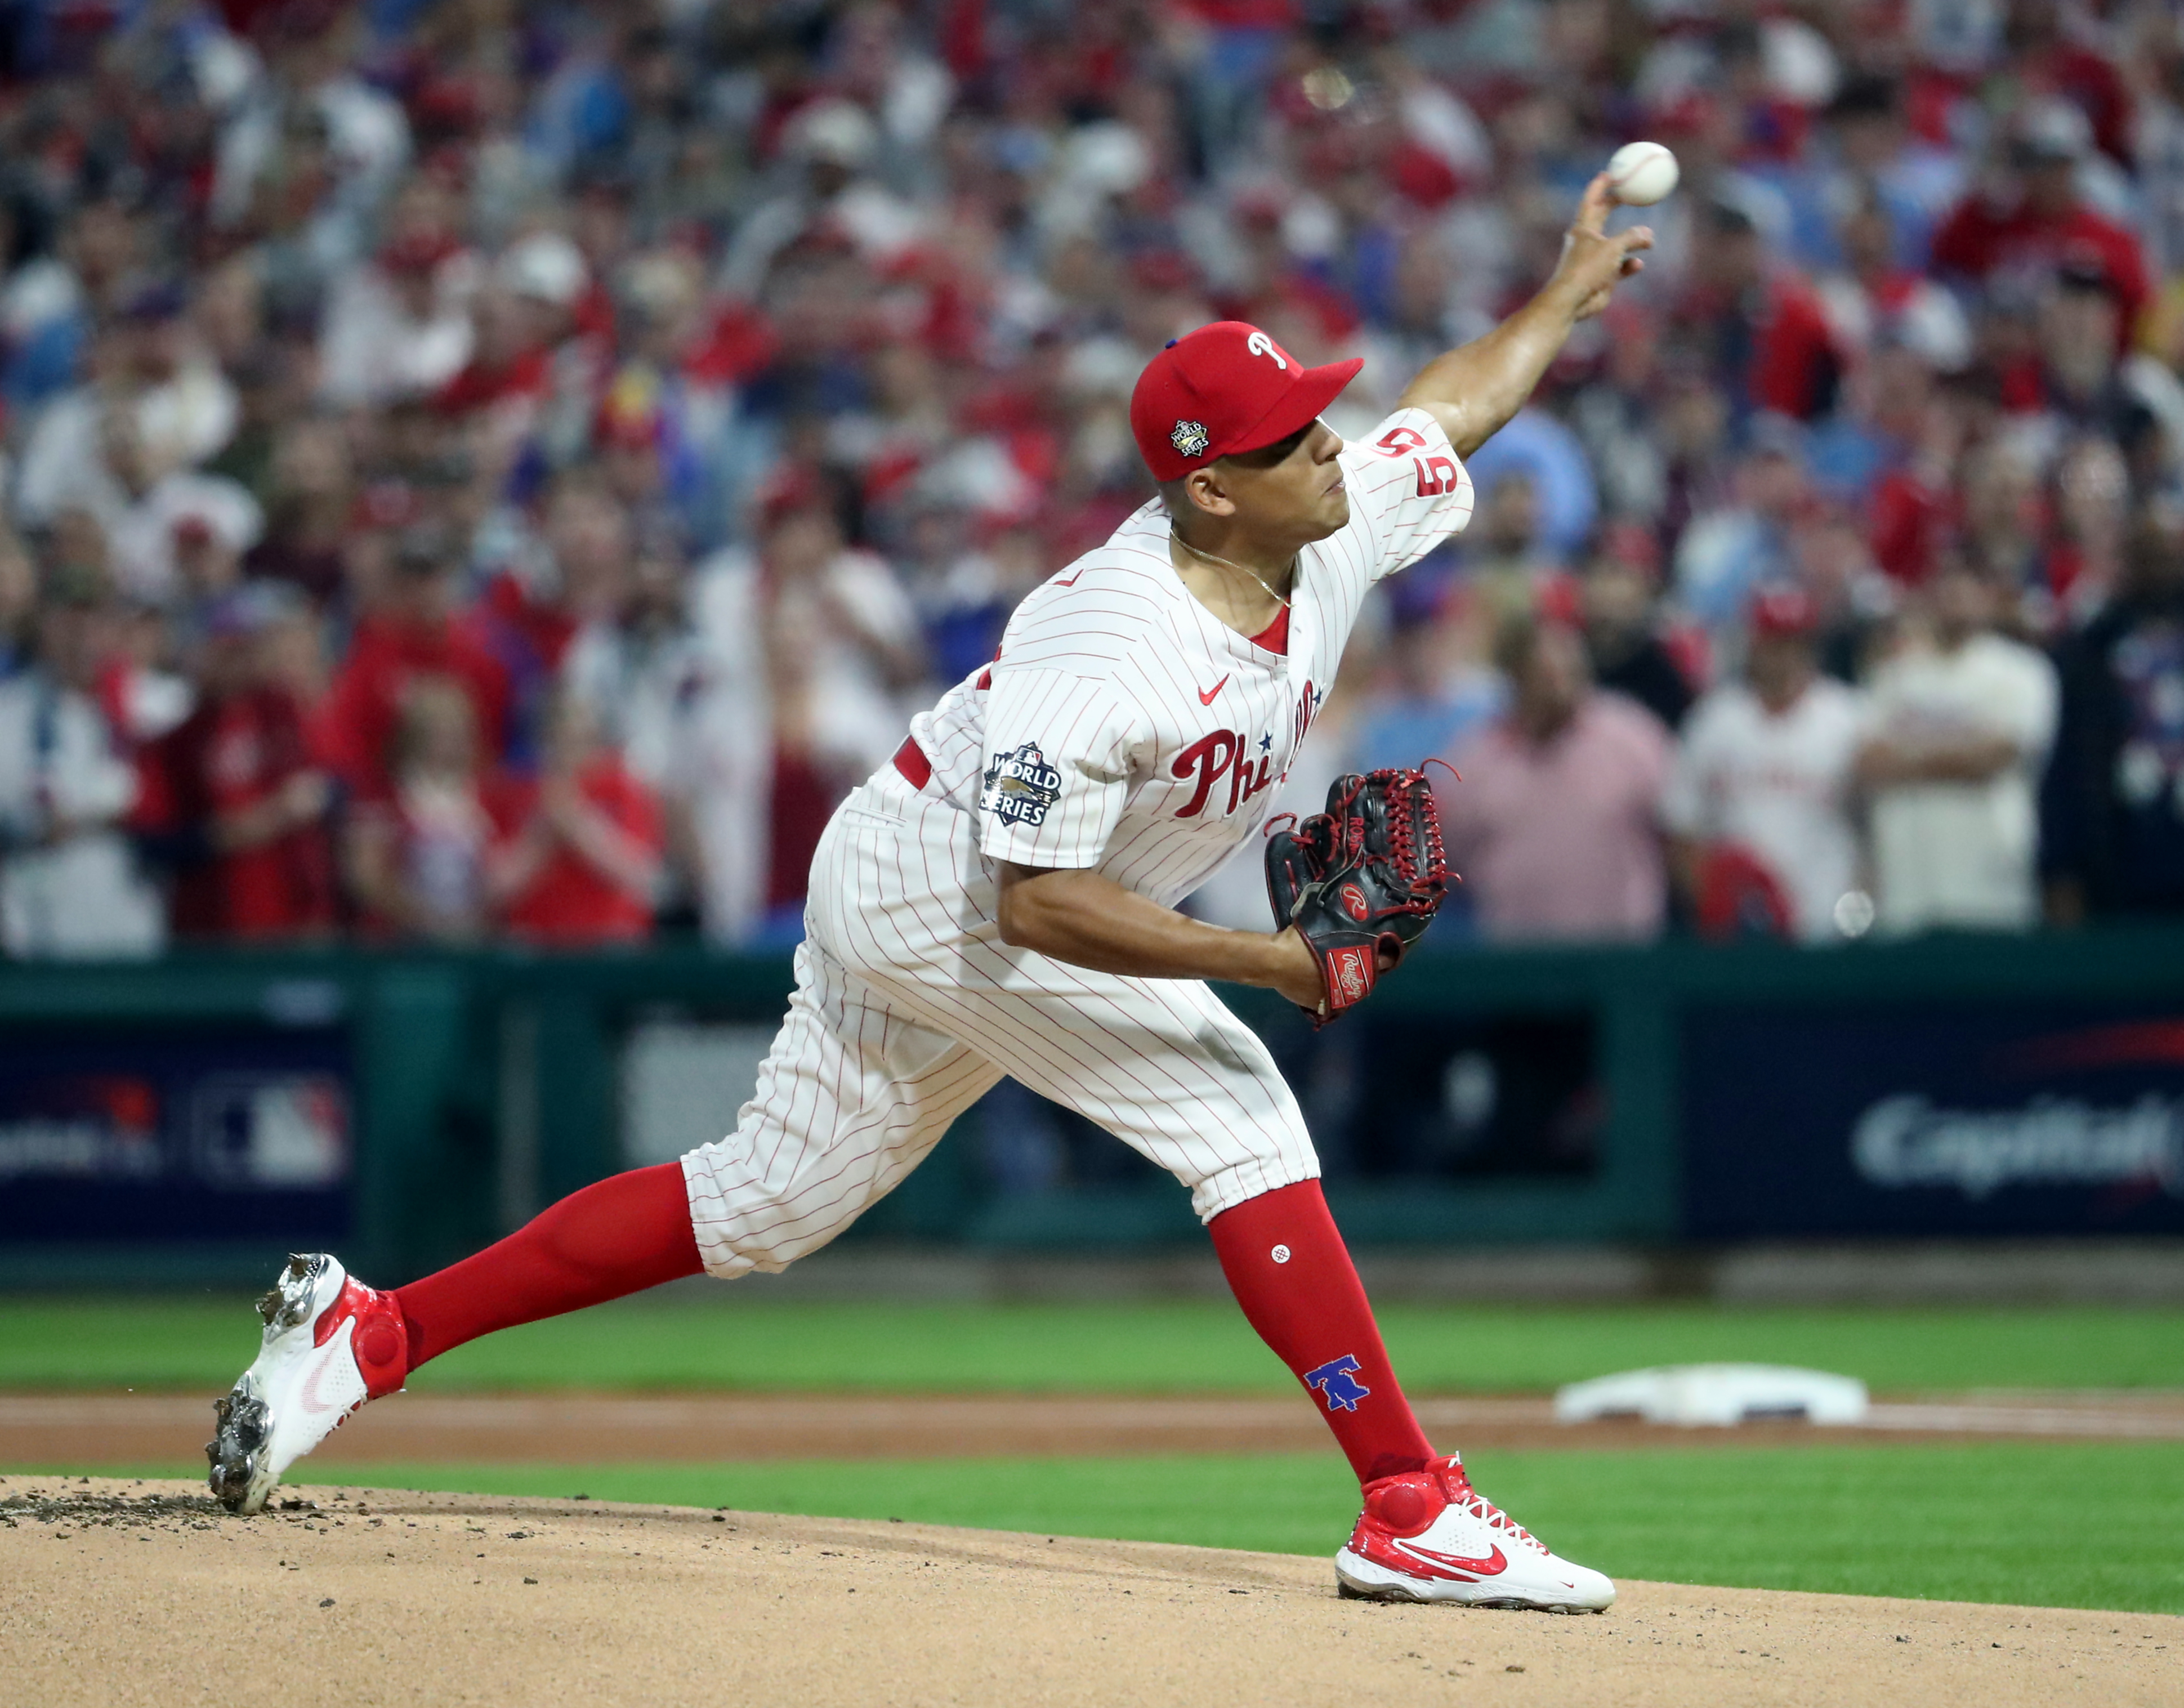 Ranger Suarez (55) of the Philadelphia Phillies delivers the pitch in the first inning during World Series Game 3 against the Houston Astros at Citizens Bank Park, Tuesday, Nov. 1, 2022.